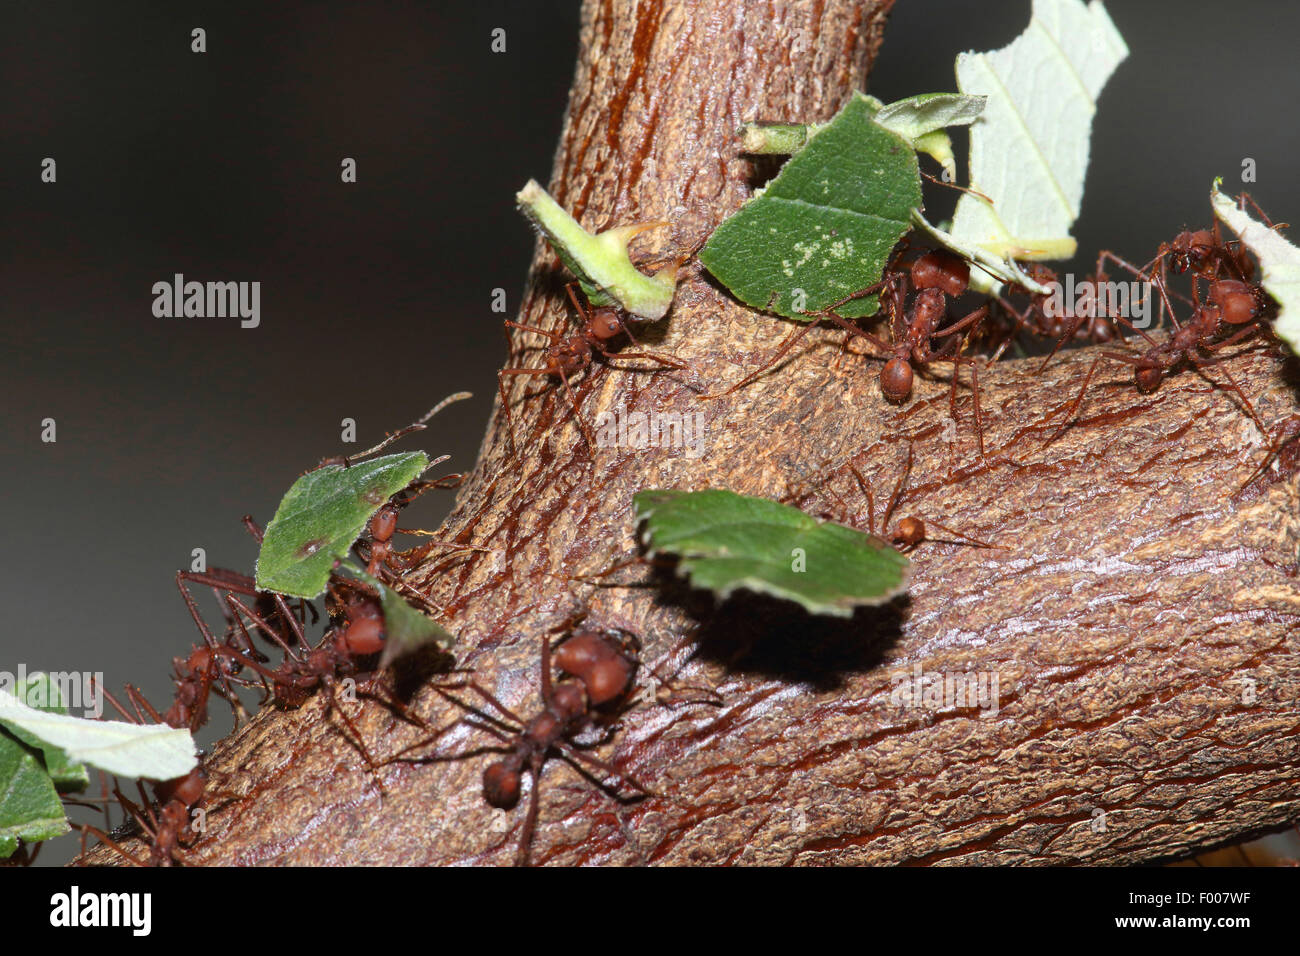 Leafcutting ant (Atta sexdens), leafcutting ants transporting leaf pieces on a branch Stock Photo